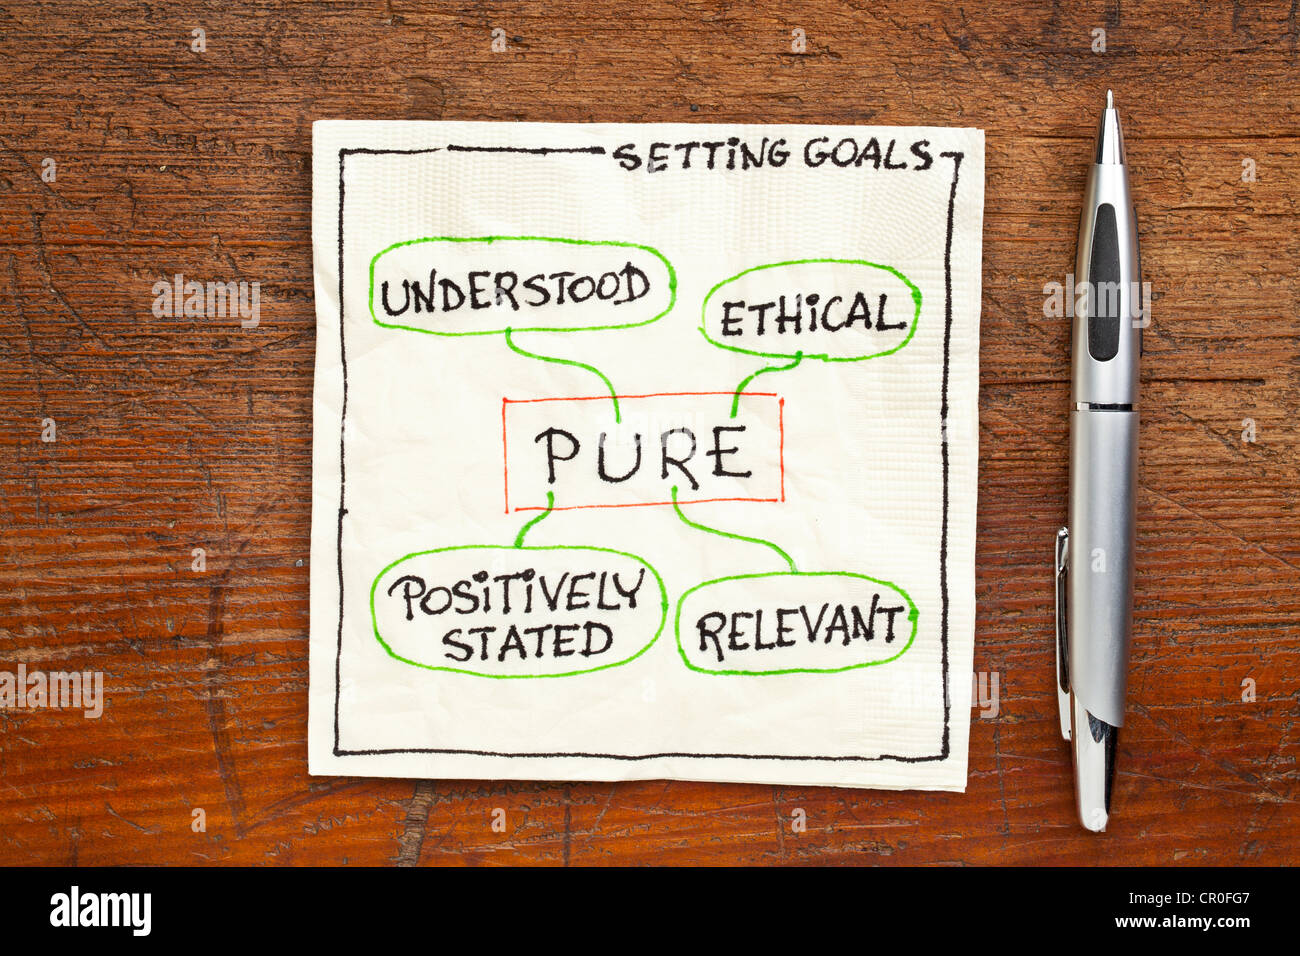 PURE (positively stated, understood, ethical) goal setting concept - a napkin doodle on a grunge wooden table Stock Photo